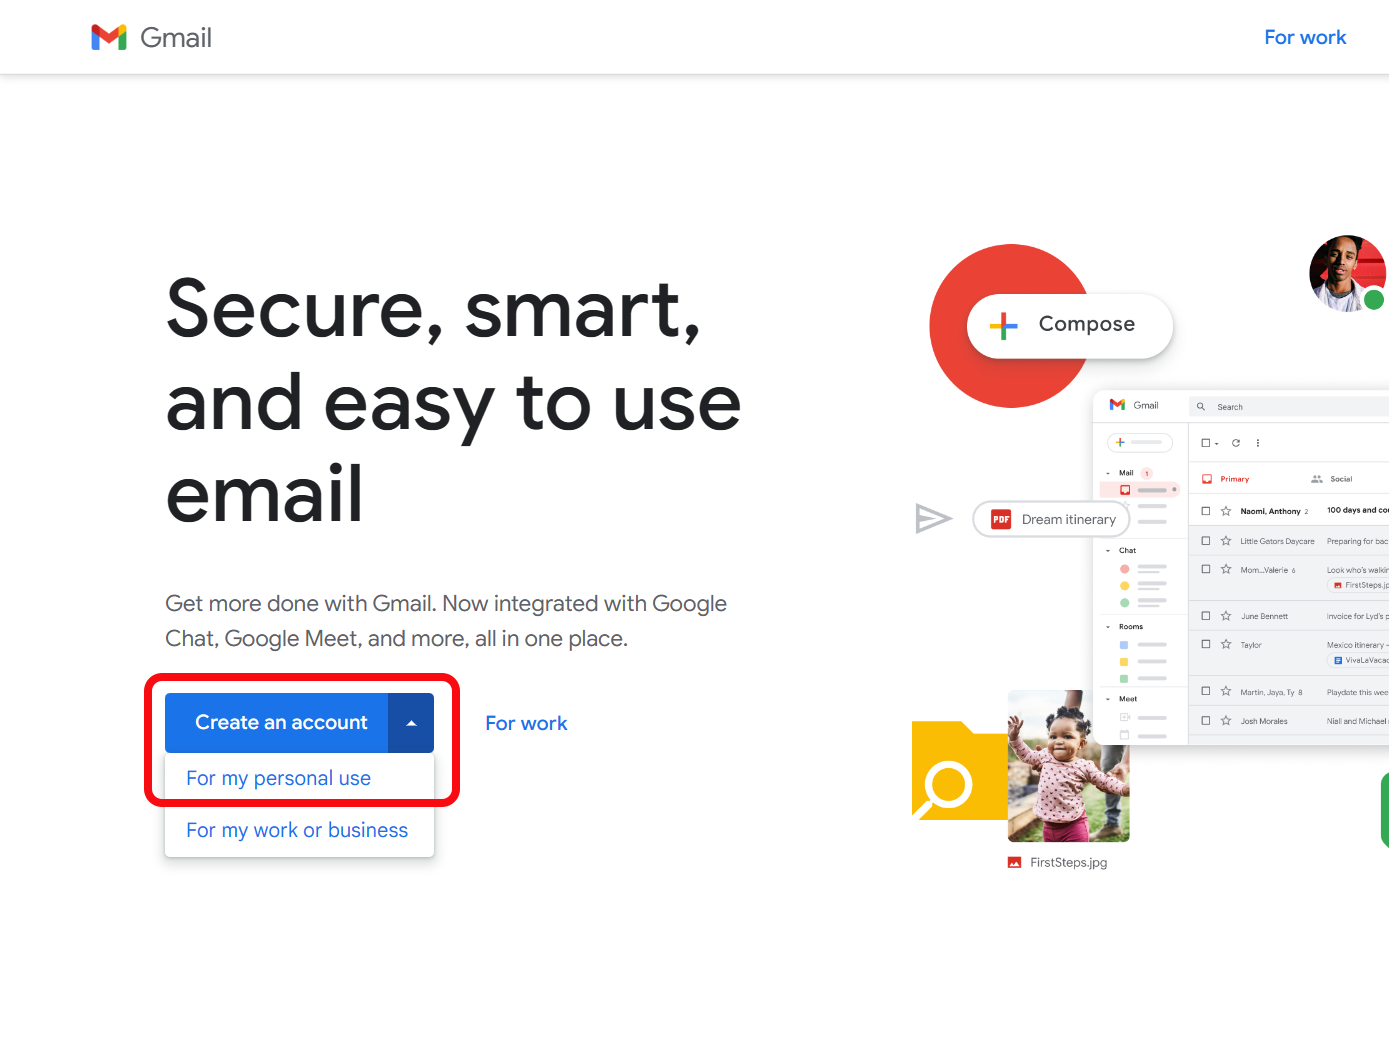 Creating a new account on the Gmail website